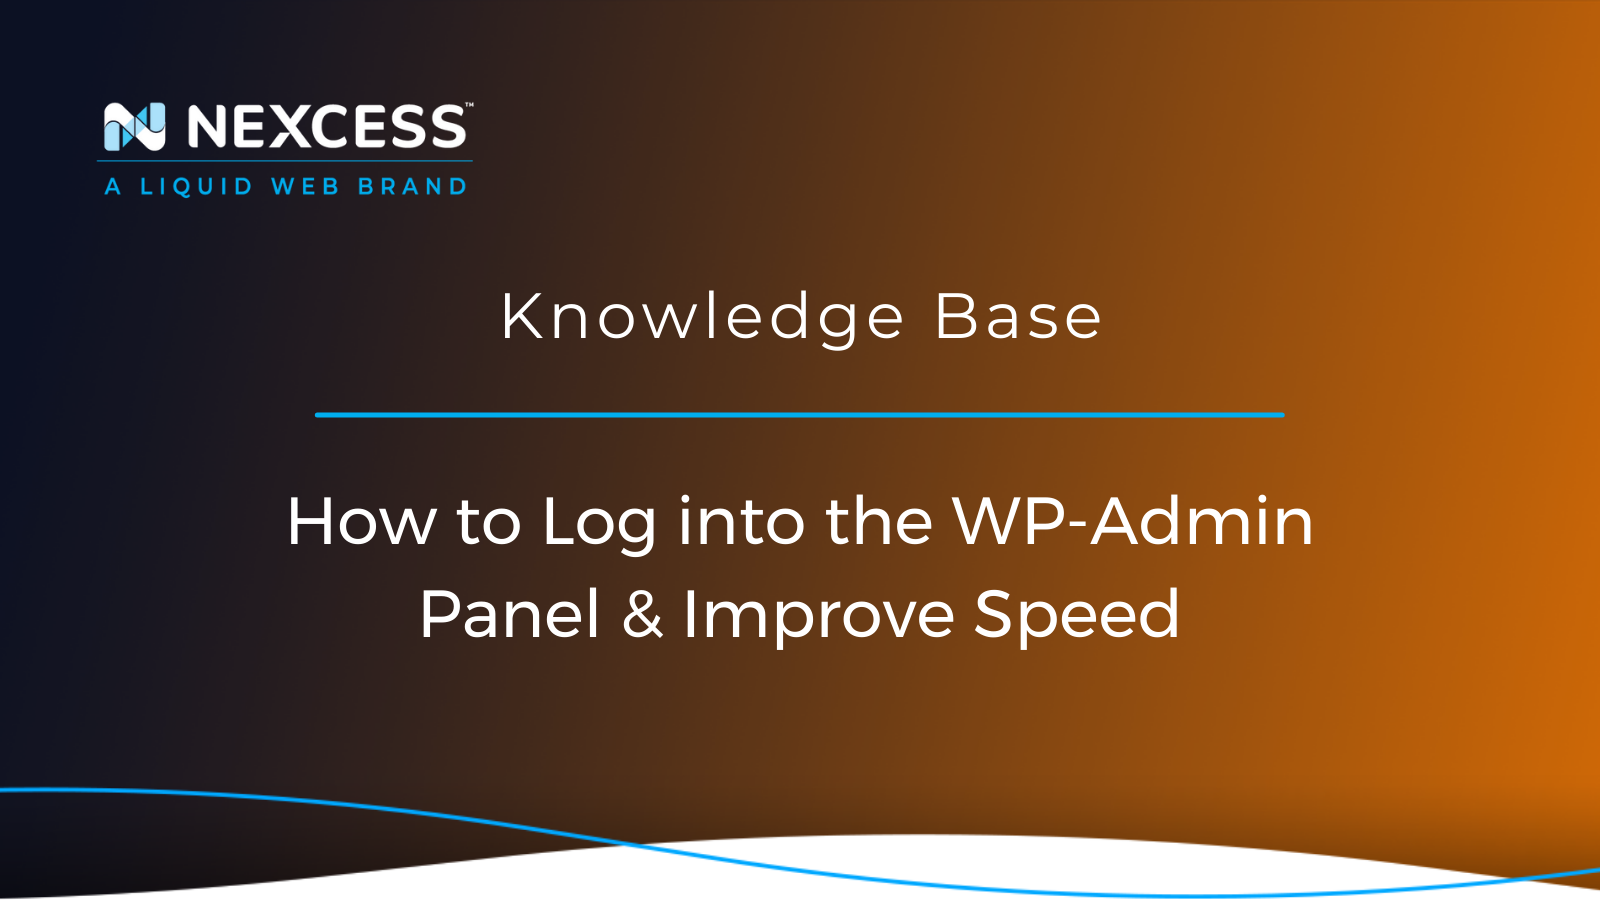 How to Log into the WP-Admin Panel & Improve Speed